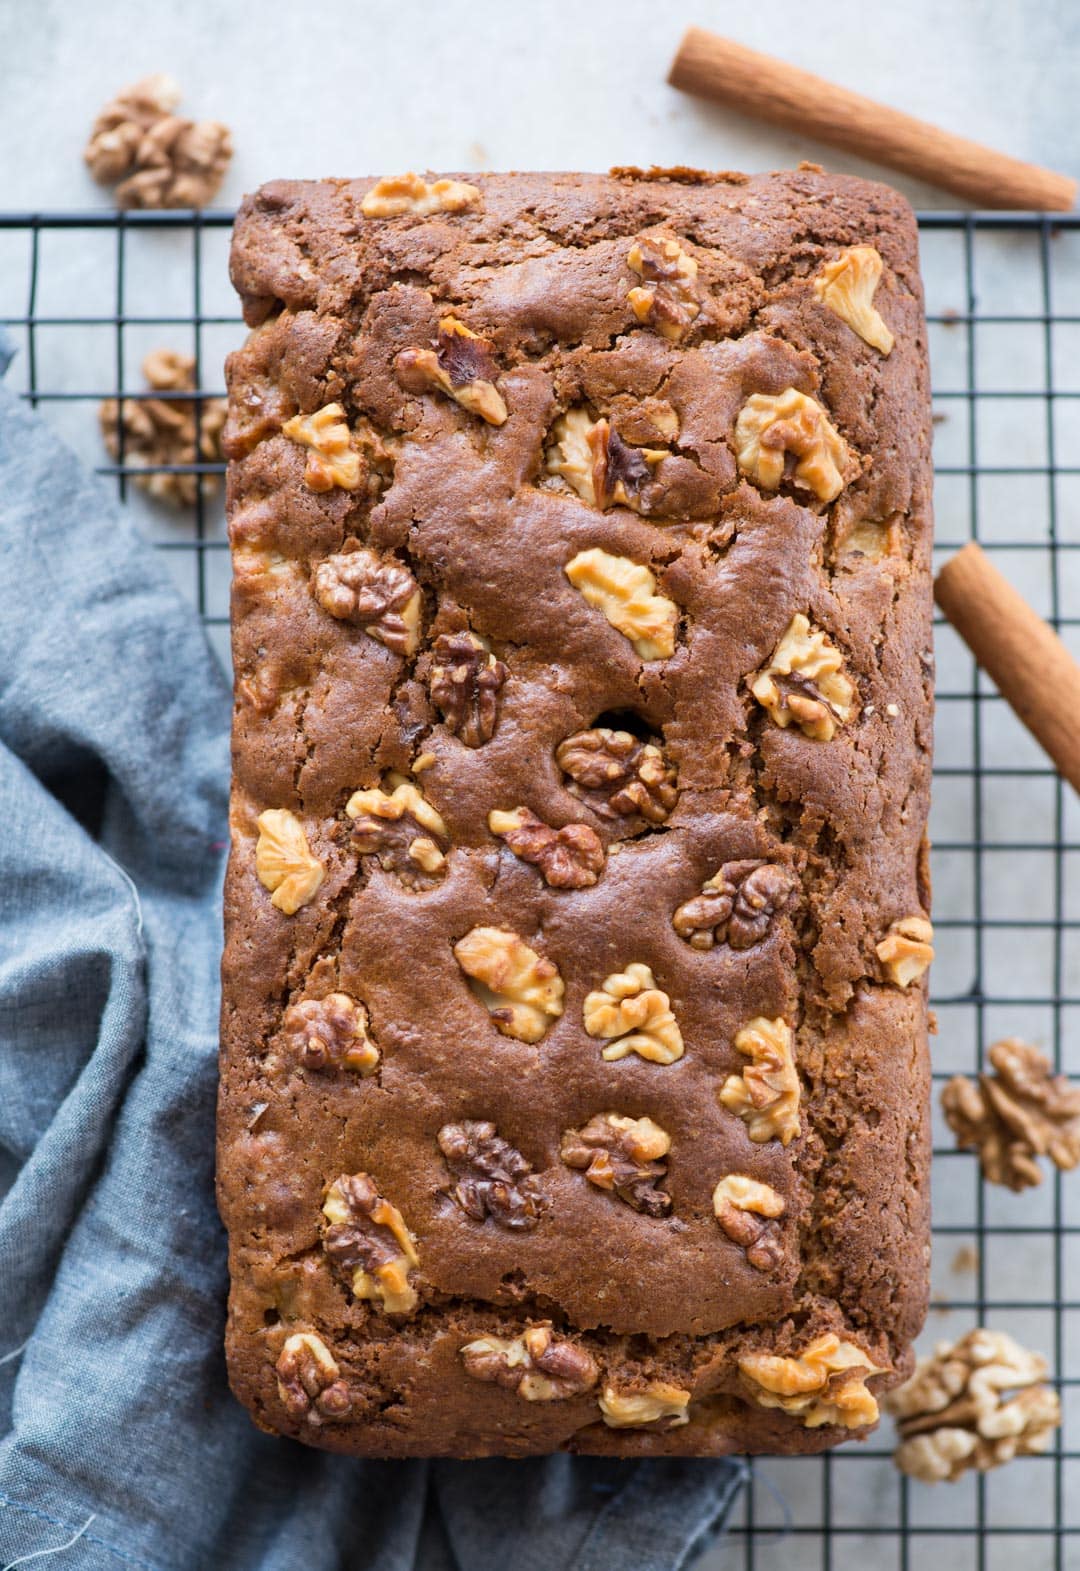 Apple Cake with chunks of fresh apple, walnut is super moist and a perfect cake with your afternoon tea. With a hint of cinnamon, this cake has tender crumbs and chunks of apple in every bite.